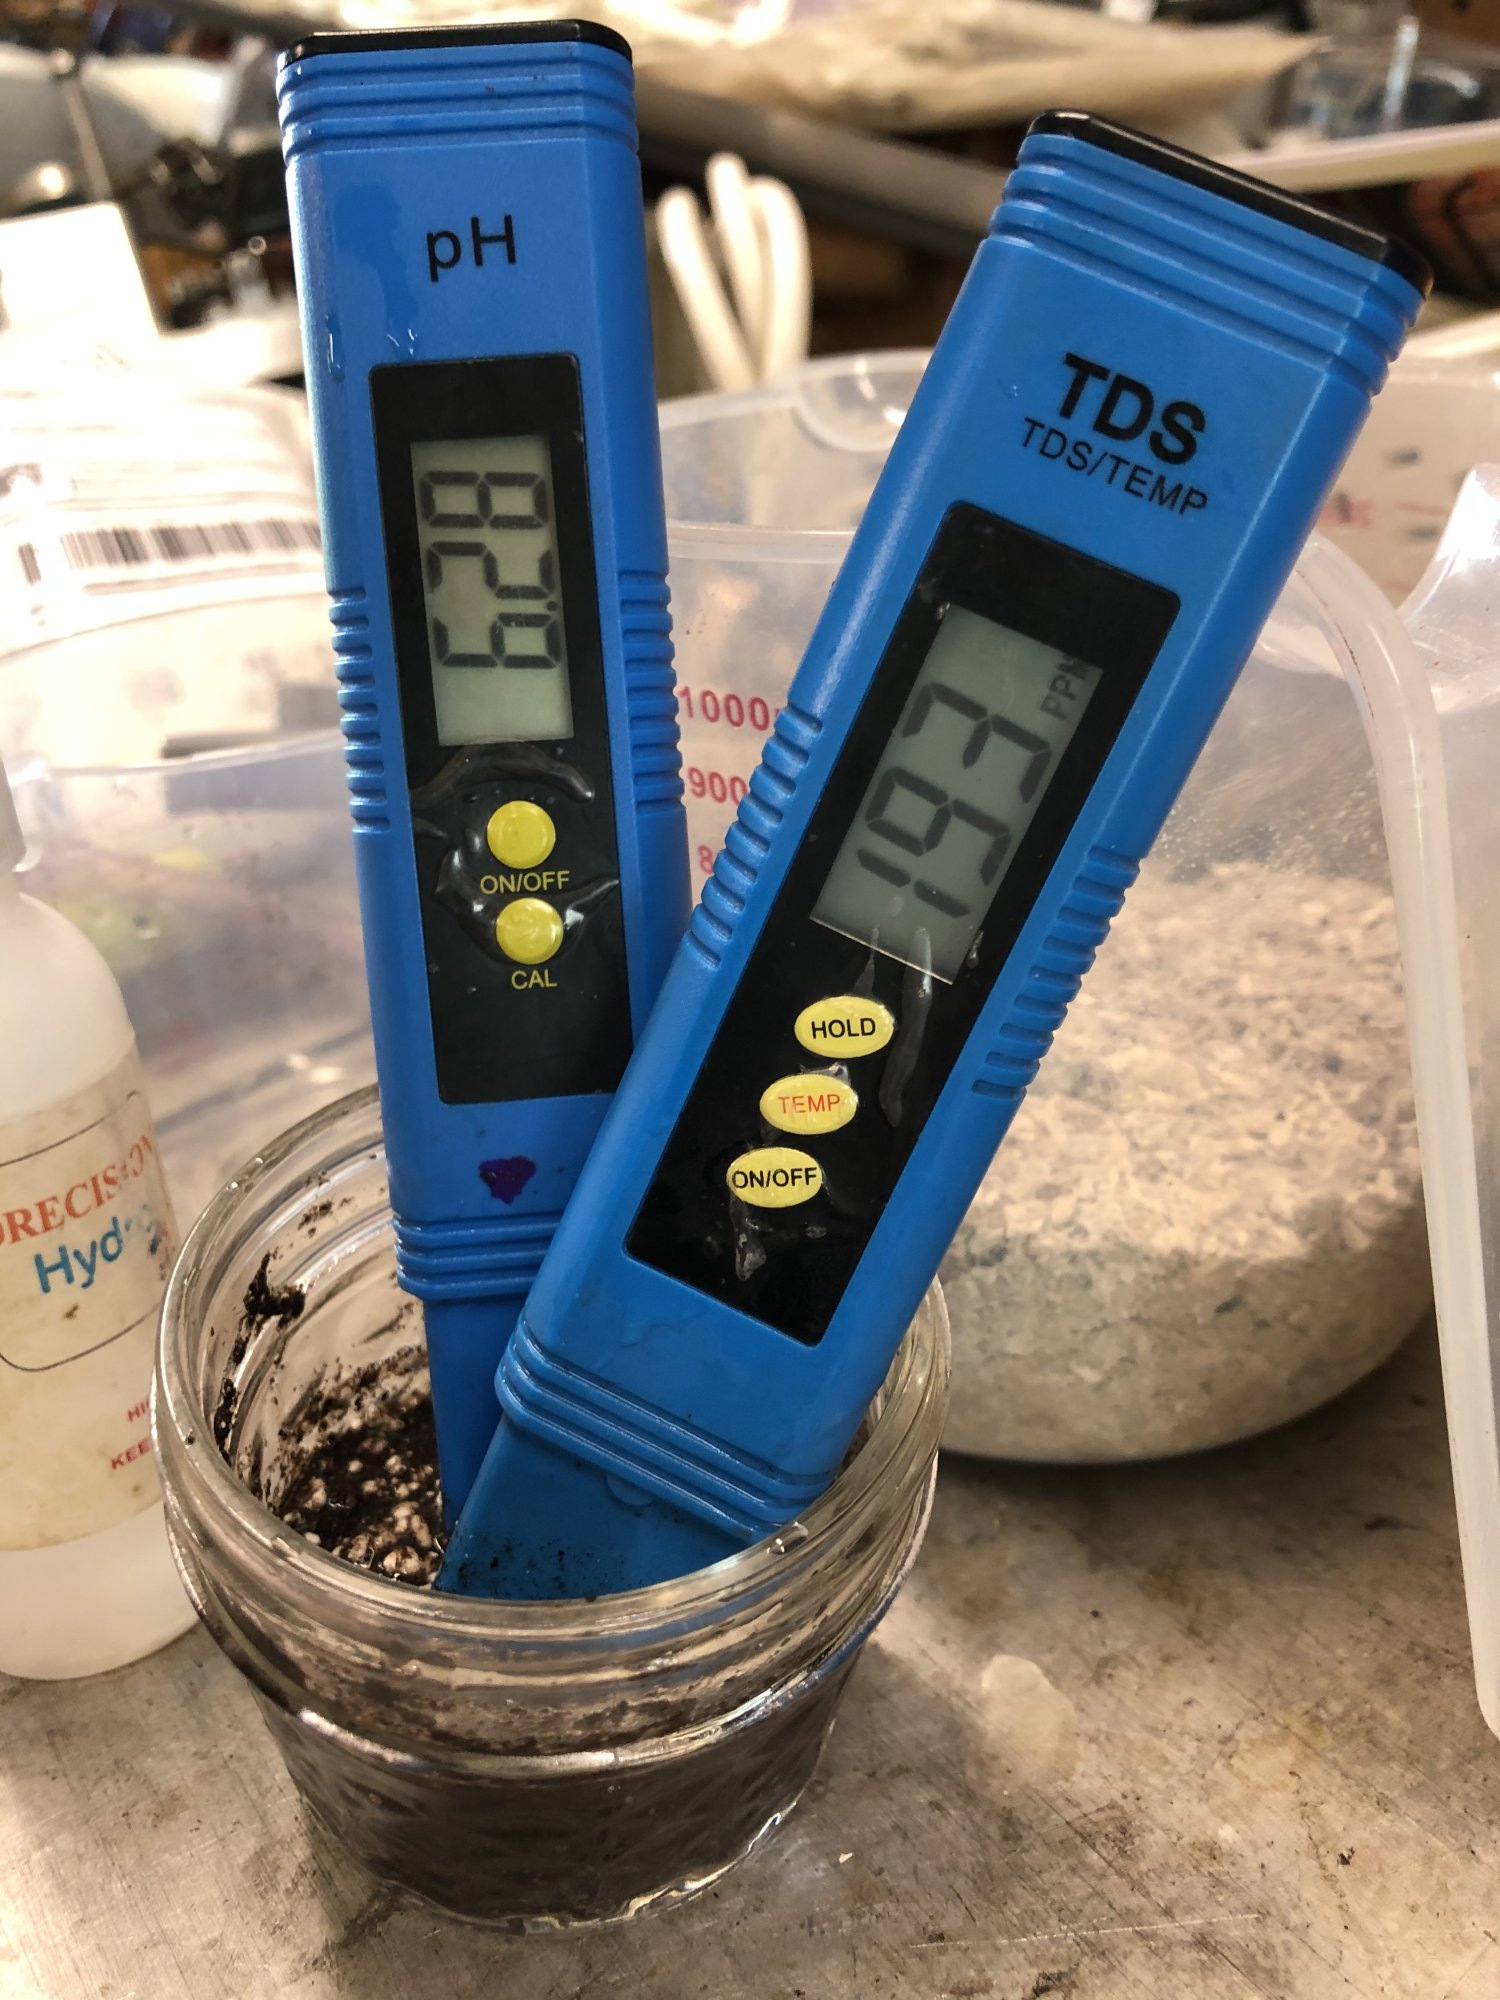 Slurry test shows 197 ppm too low